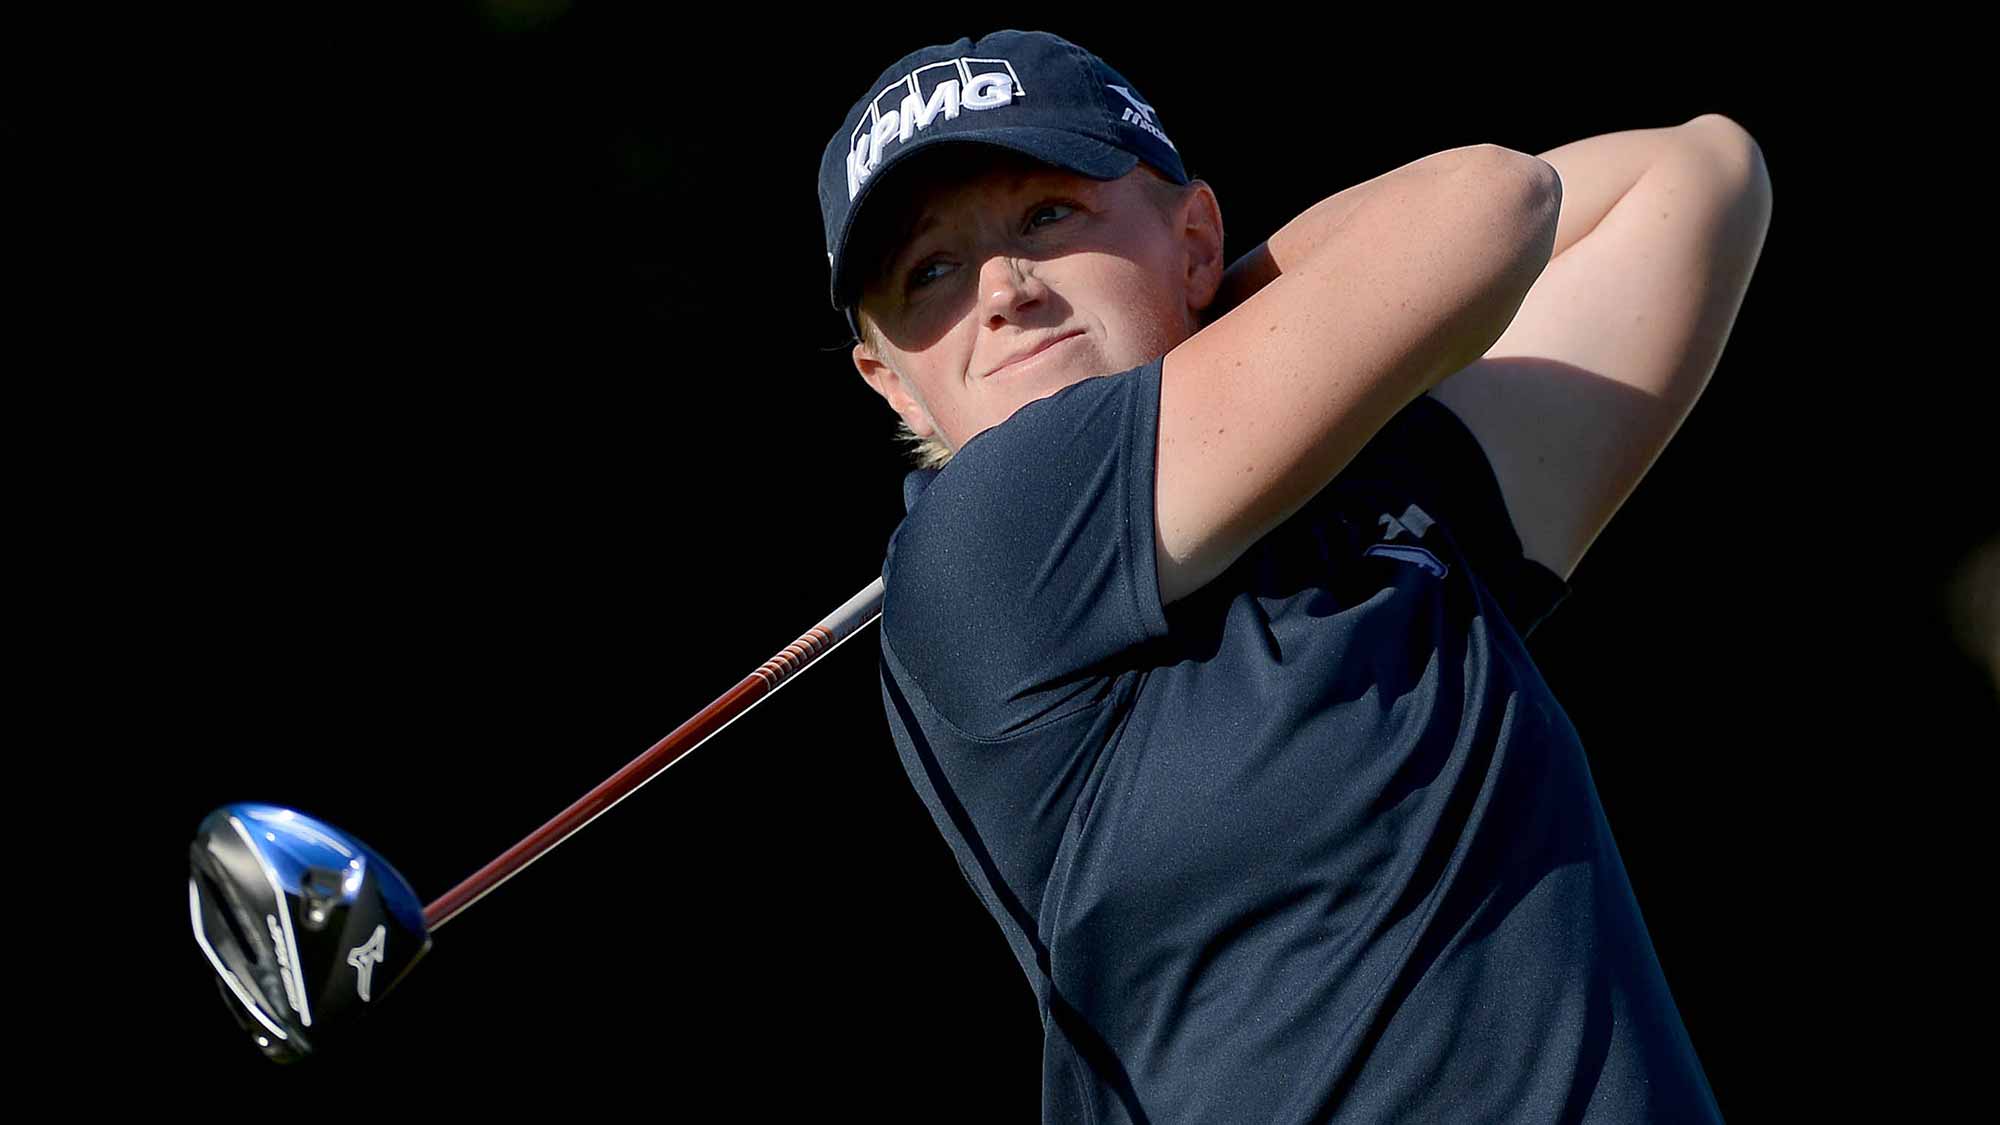 Stacy Lewis tees off the 18th hole during Round One of the LPGA KIA Classic at the Aviara Golf Club on March 26, 2015 in Carlsbad, California